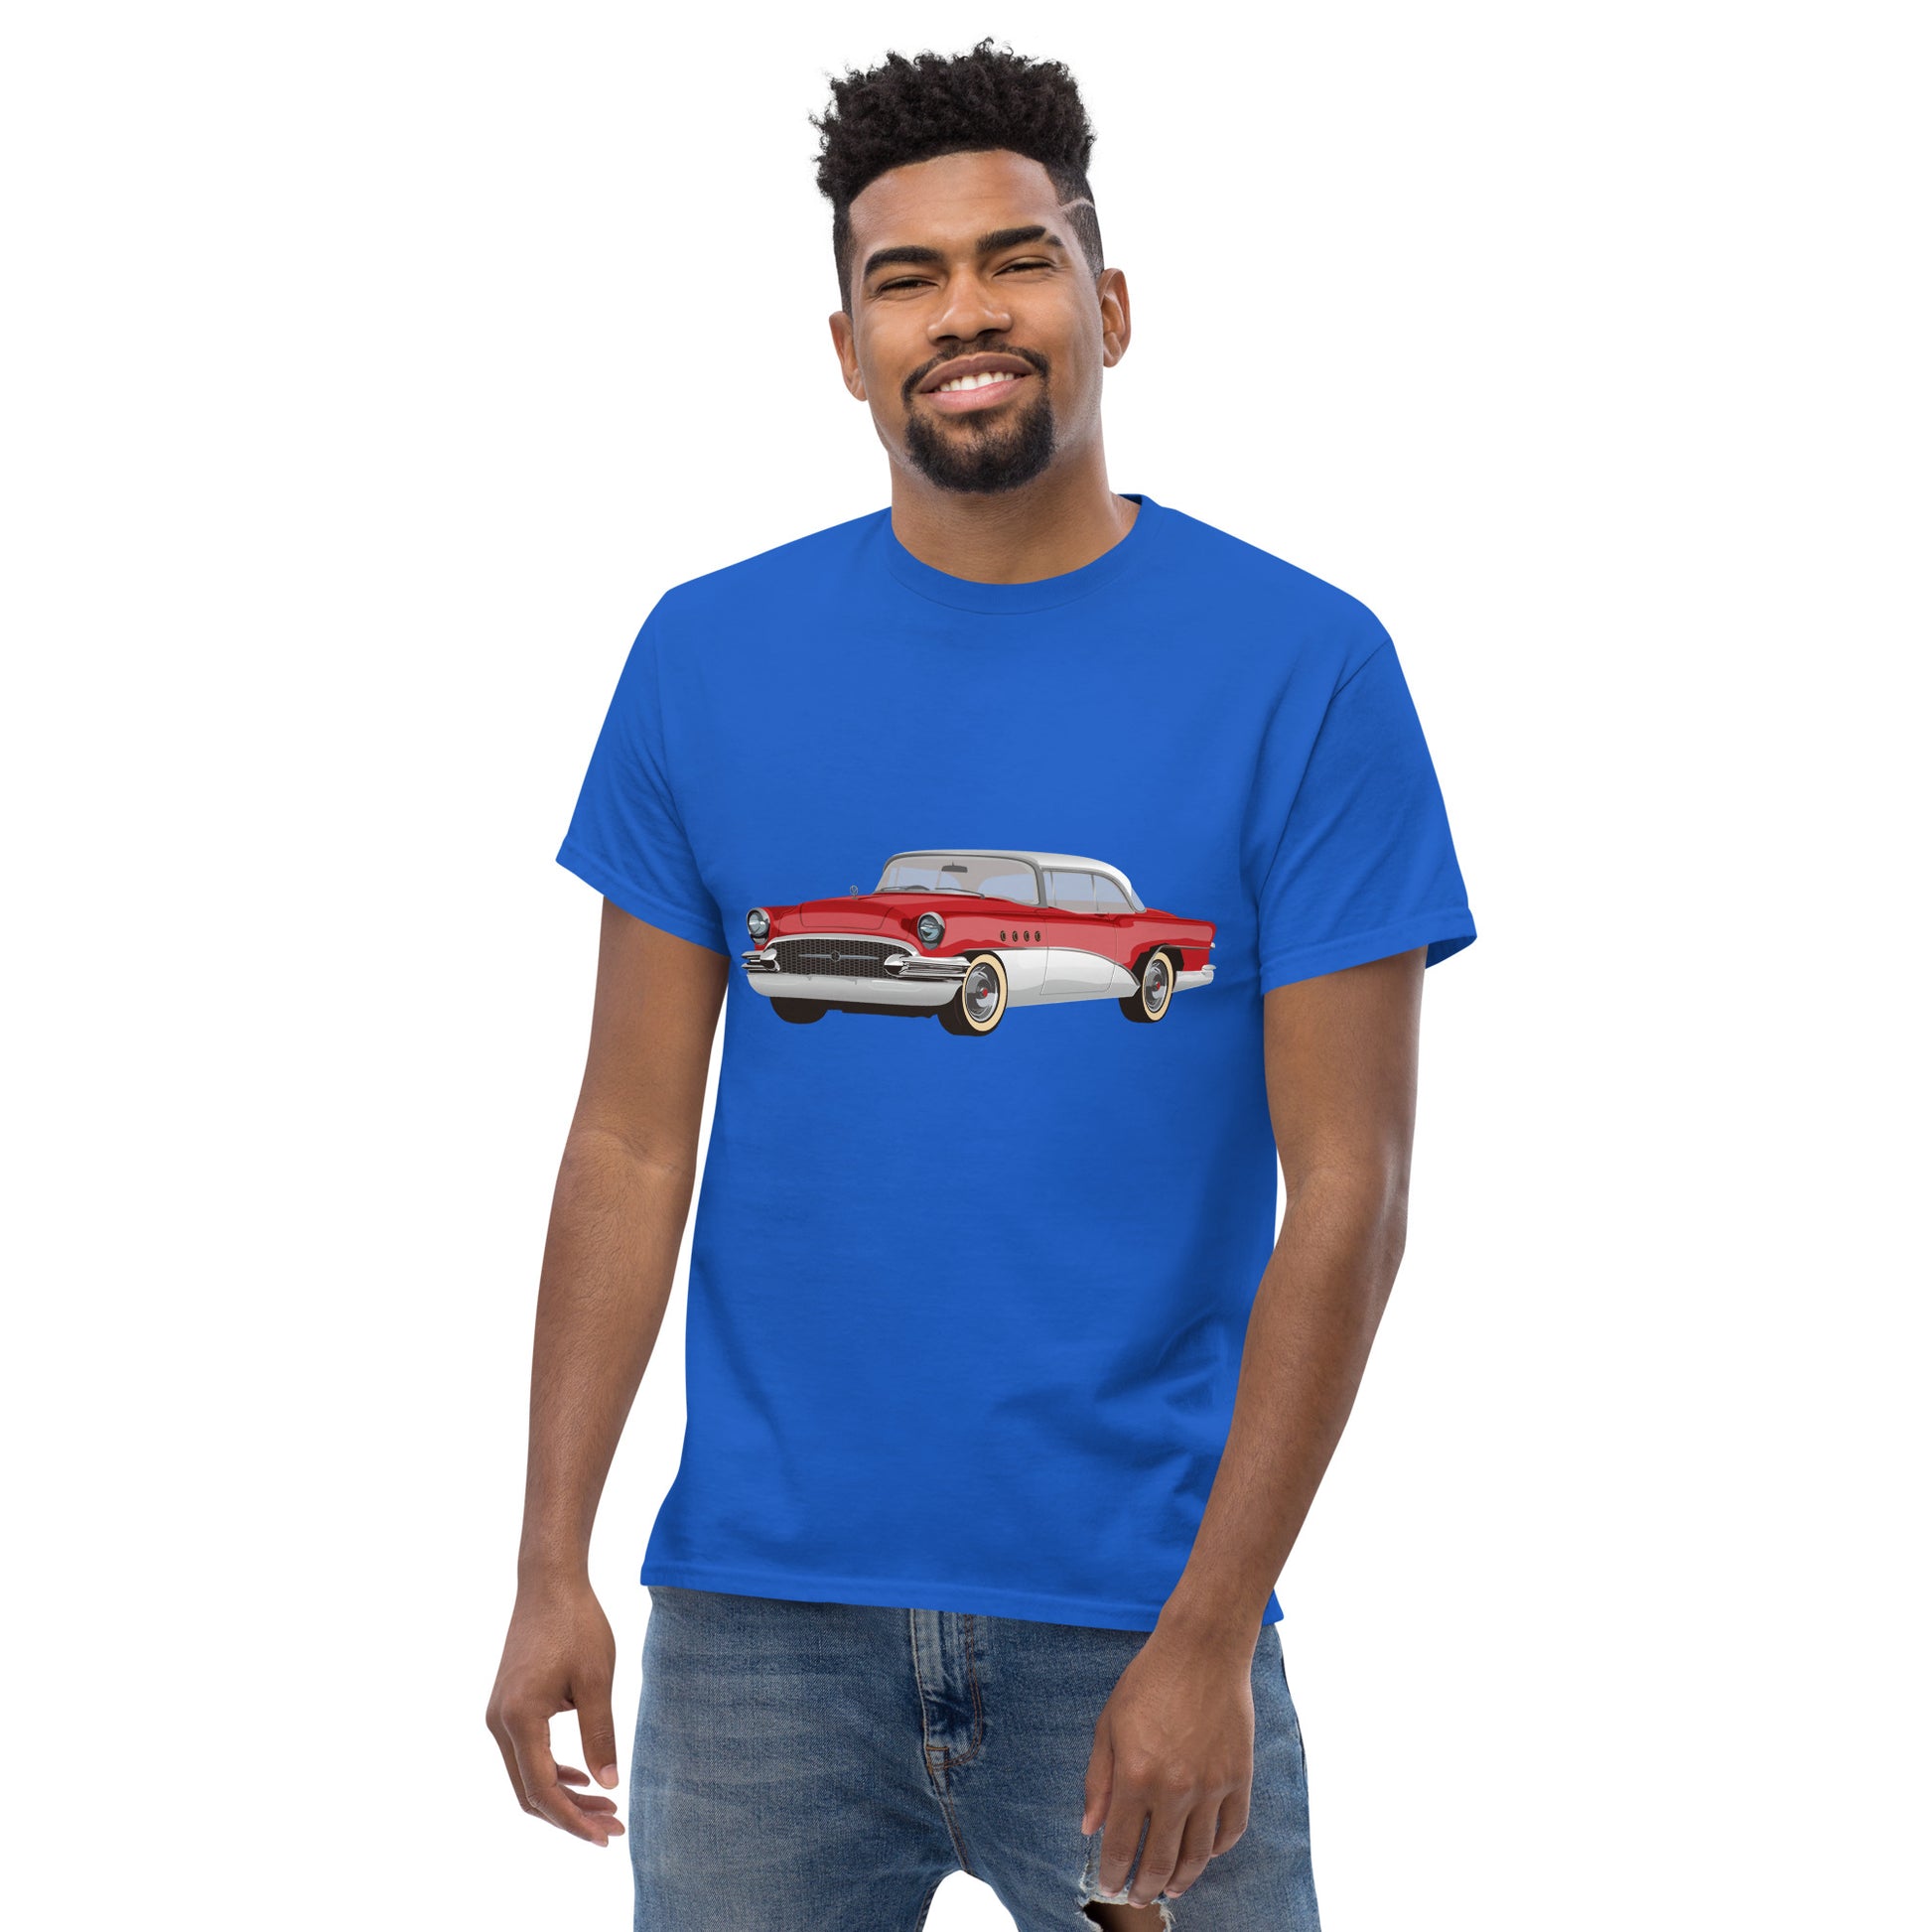 Men with royal blue t-shirt with red Chevrolet 